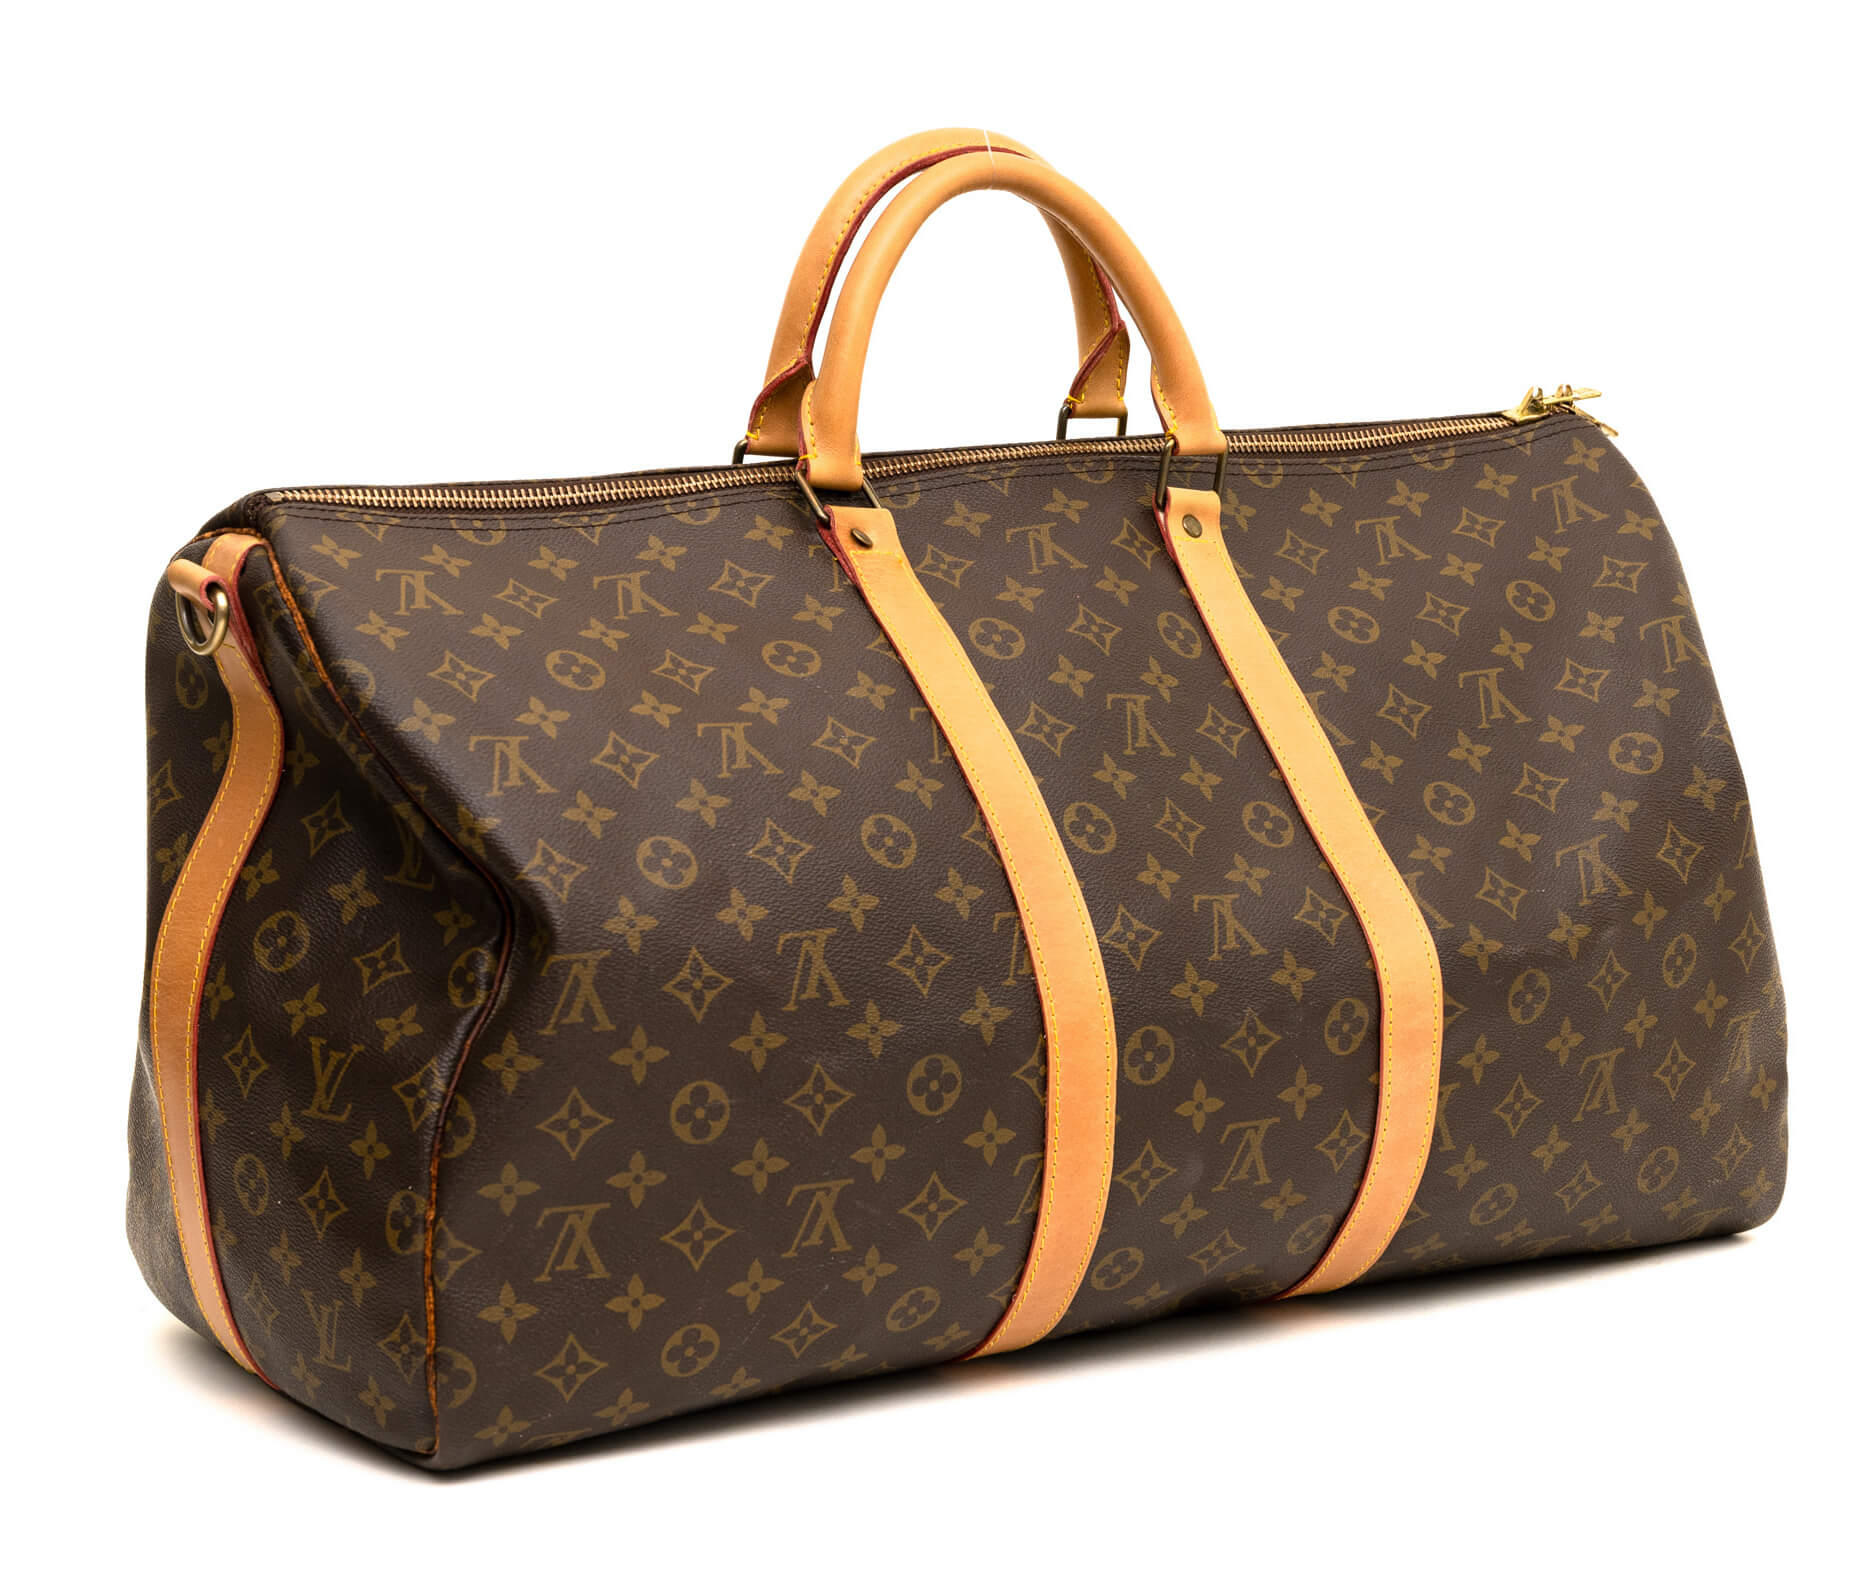 How Much Will Louis Vuitton Charge for Replacing Vachetta on Your Bag?